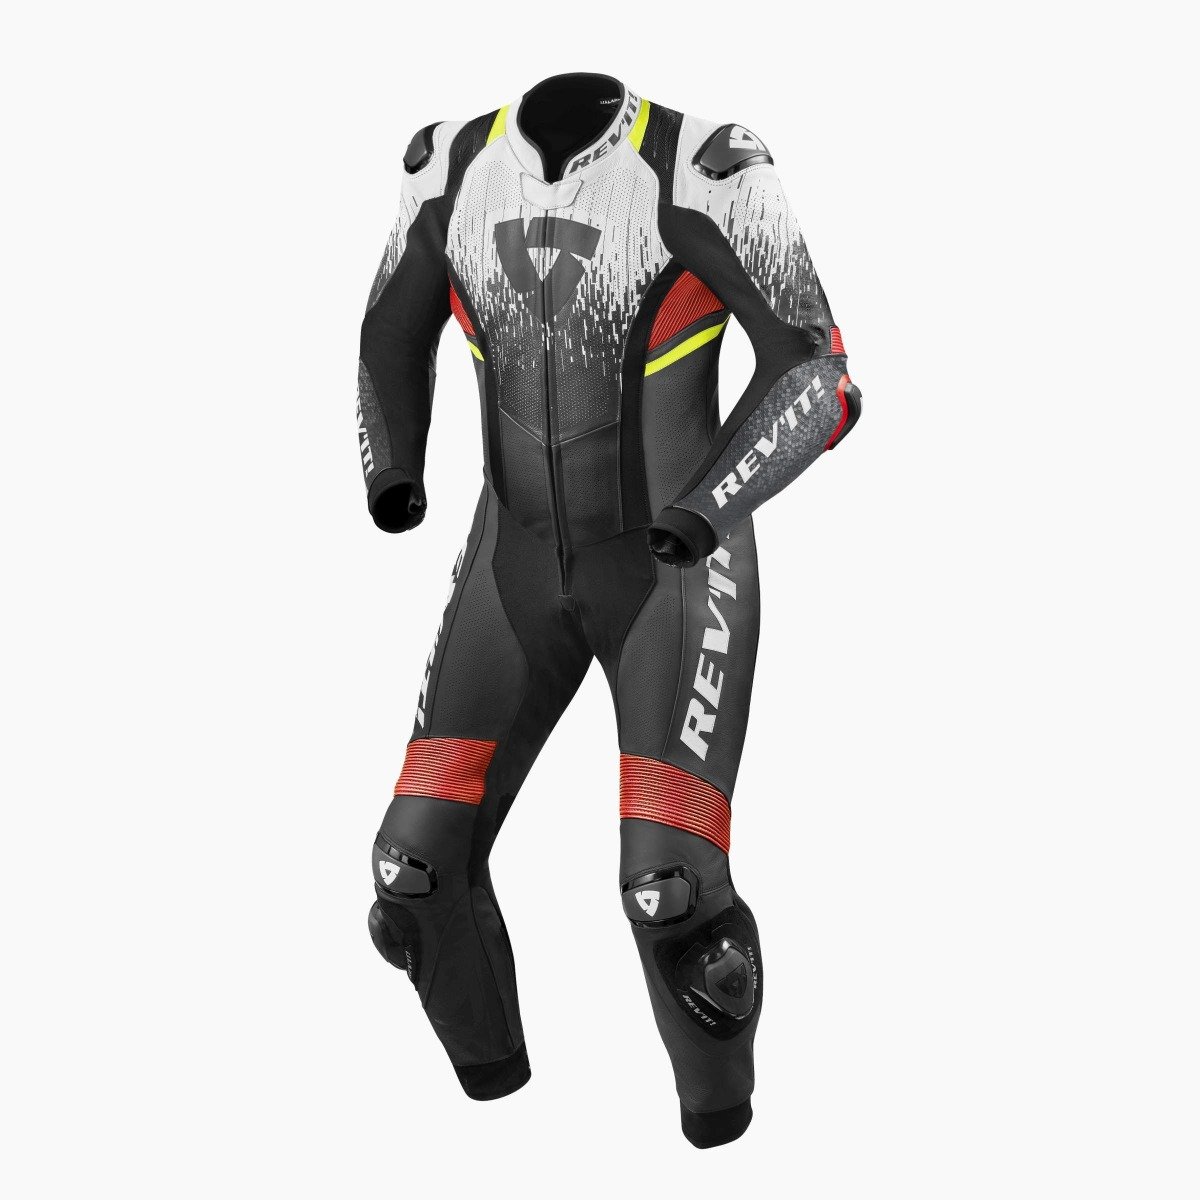 Image of REV'IT! Quantum 2 One Piece Racing Suit White Neon Red Size 54 ID 8700001313438